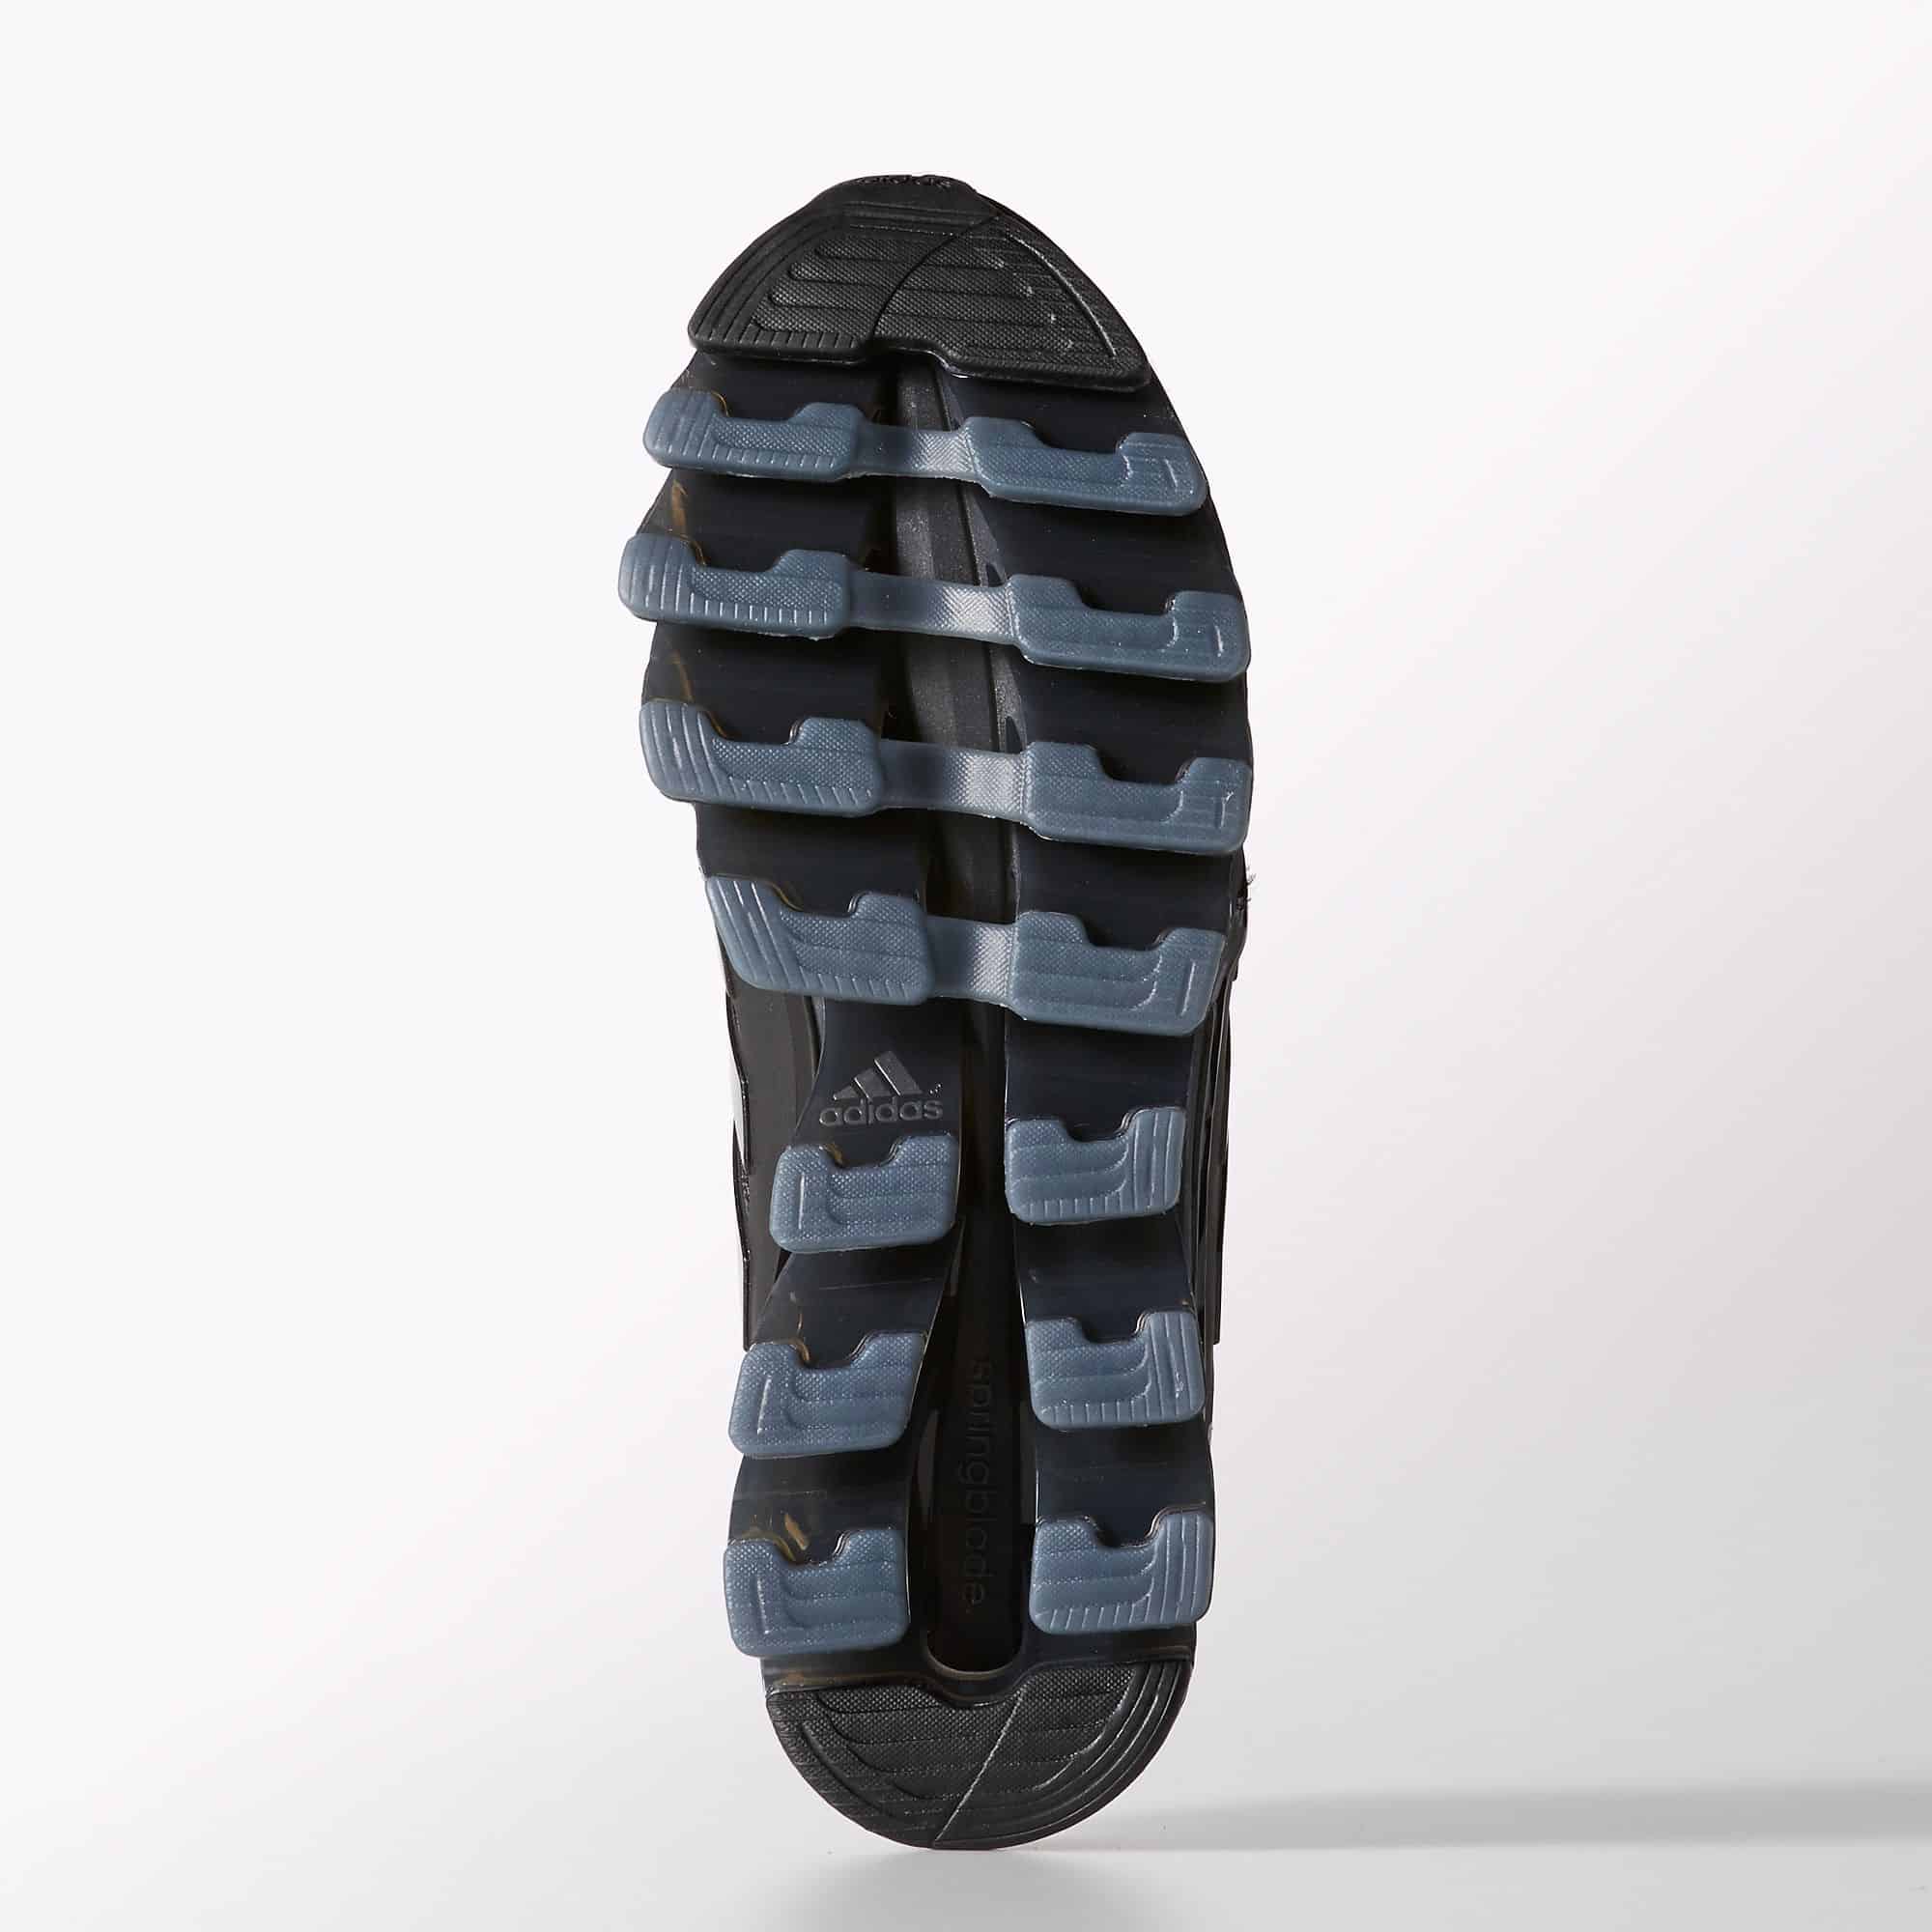 Adidas Springblade Running Shoes Outer Sole Technology